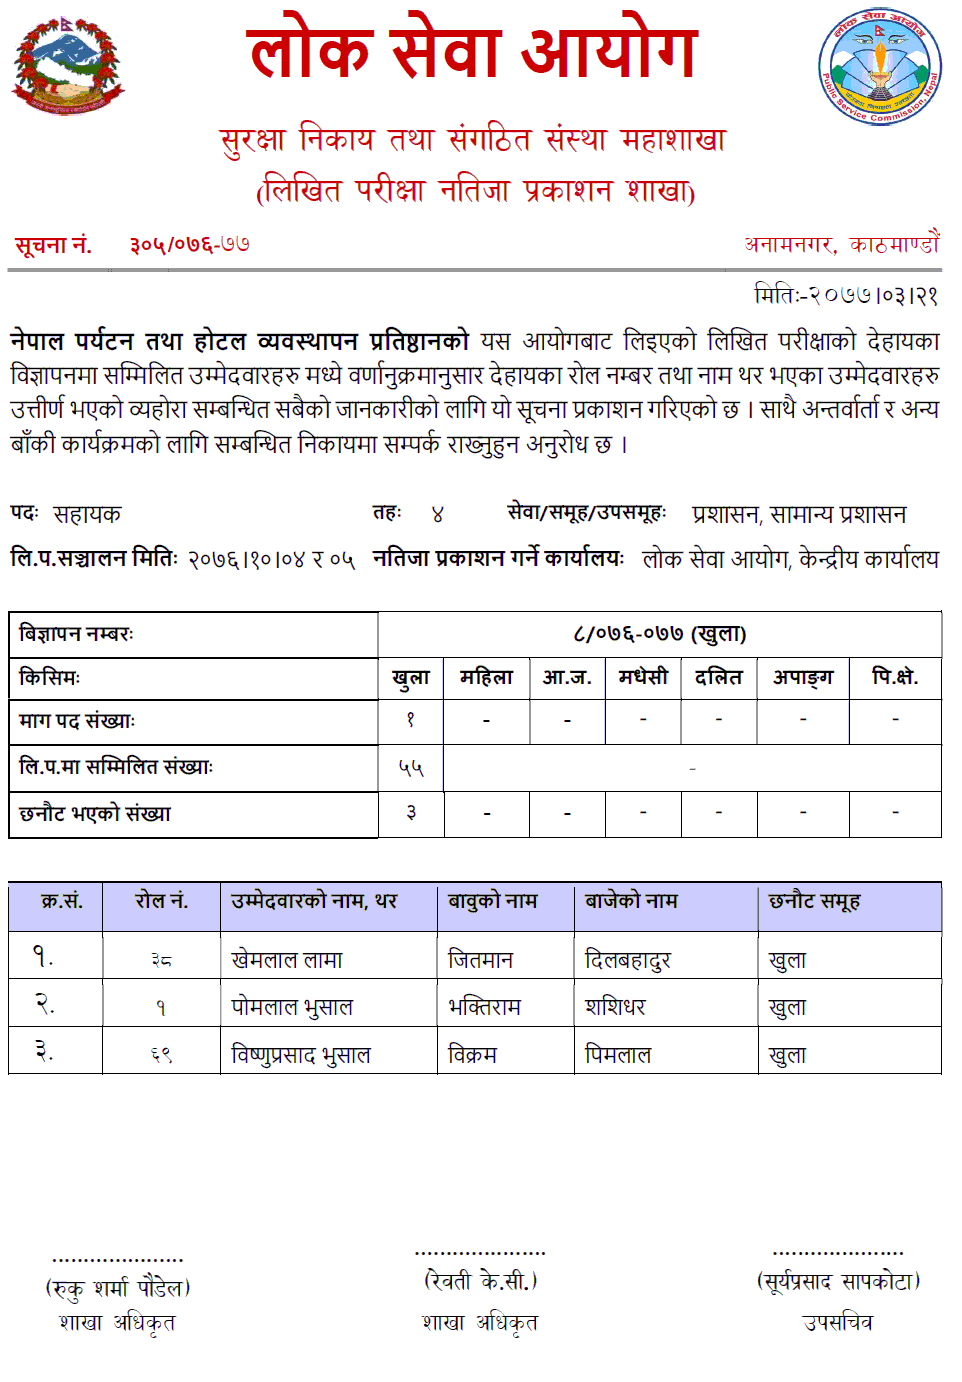 Nepal Academy of Tourism and Hotel Management (NATHM) Written Exam Result